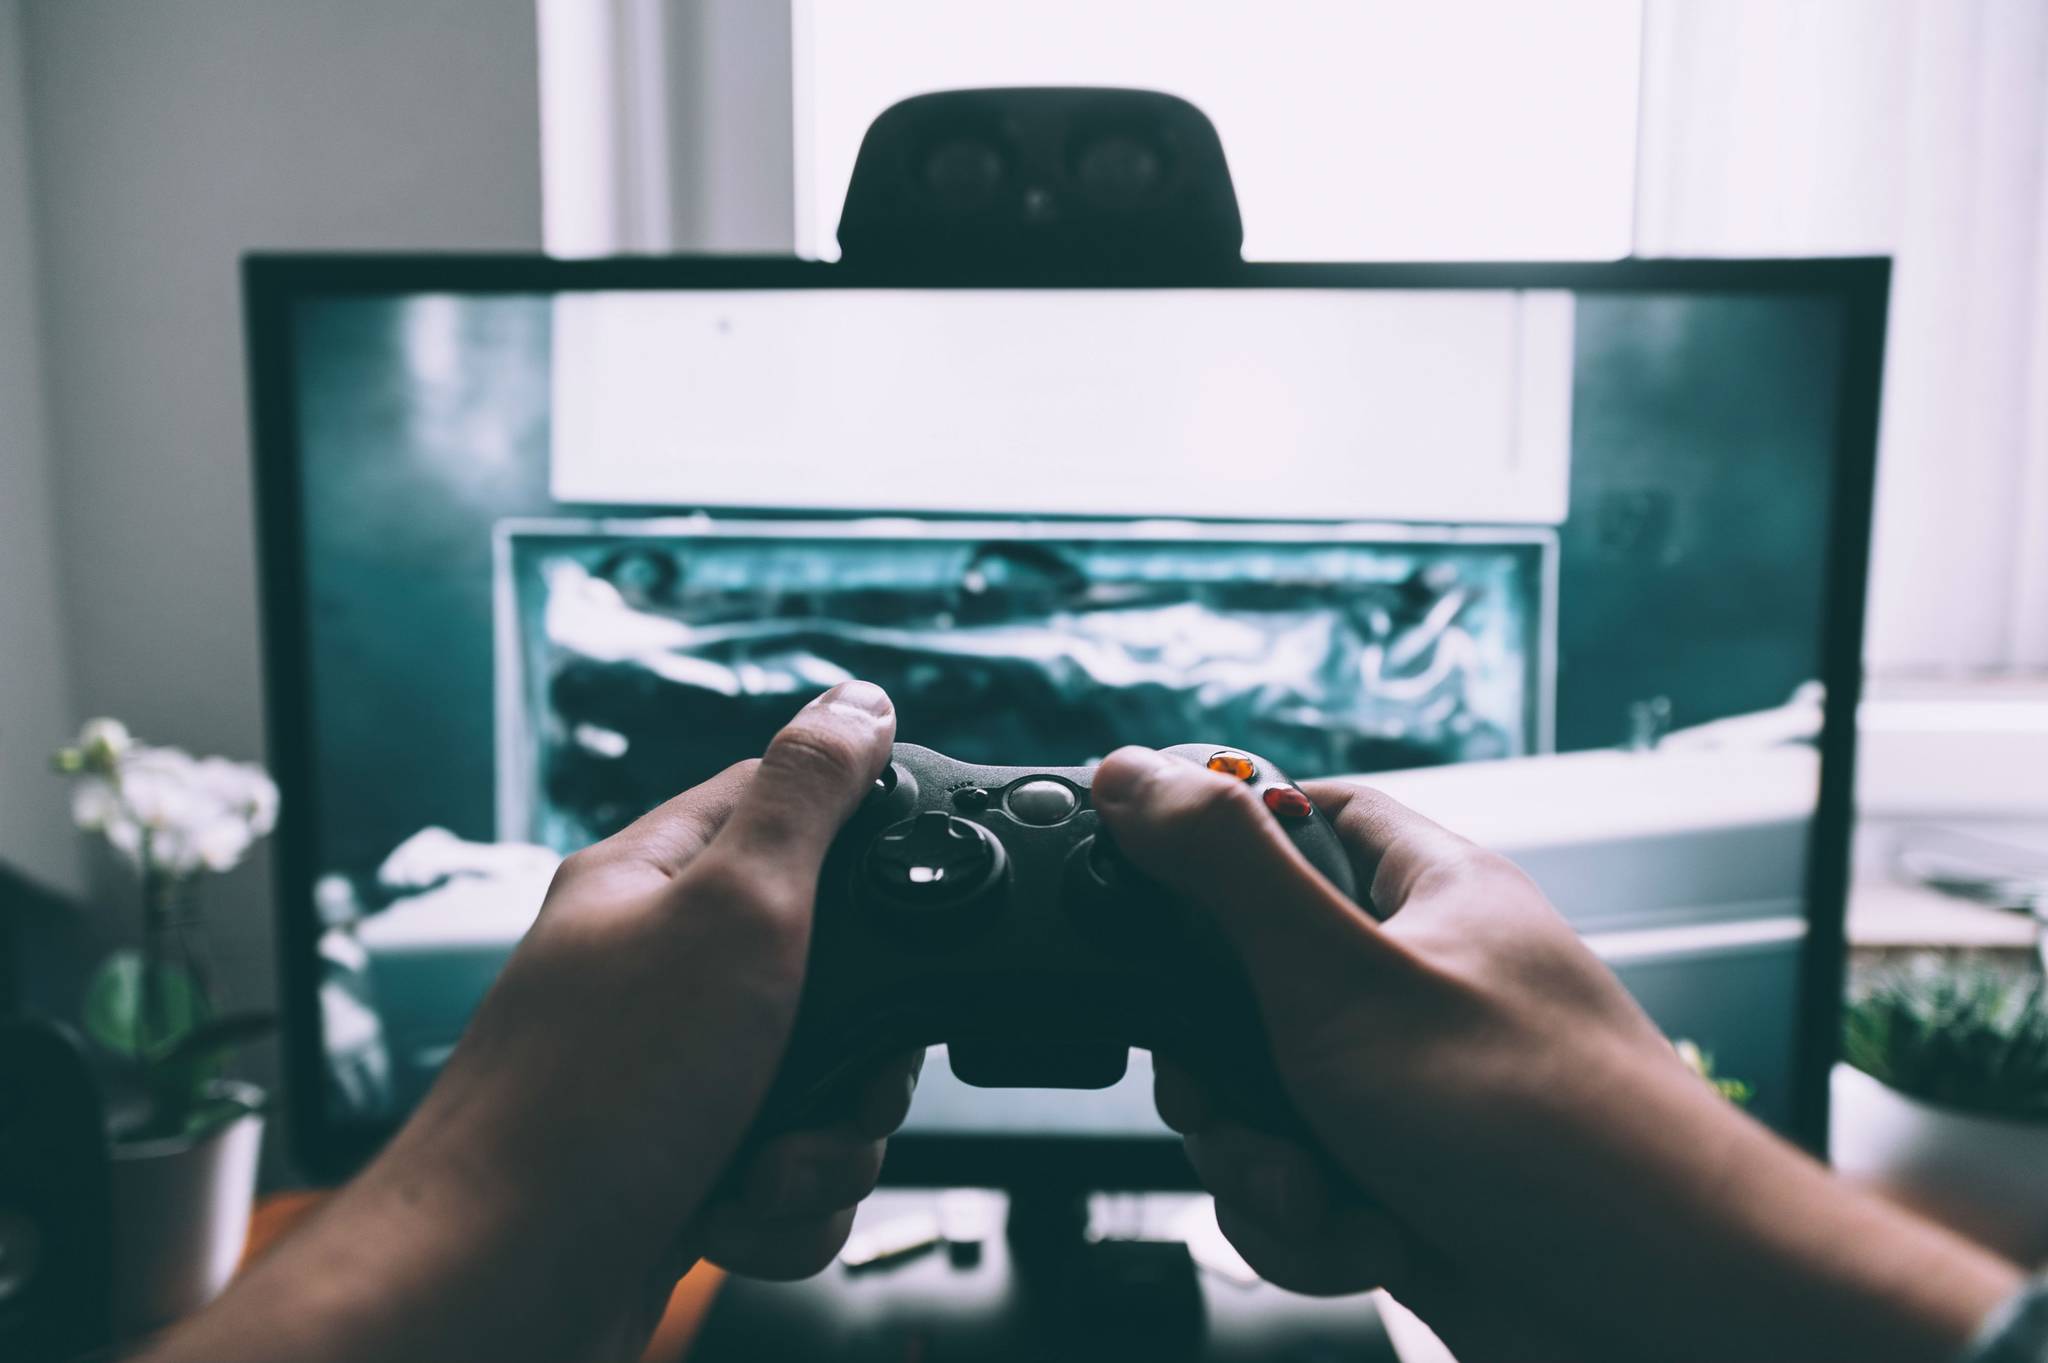 Many Britons play video games to cope with stress